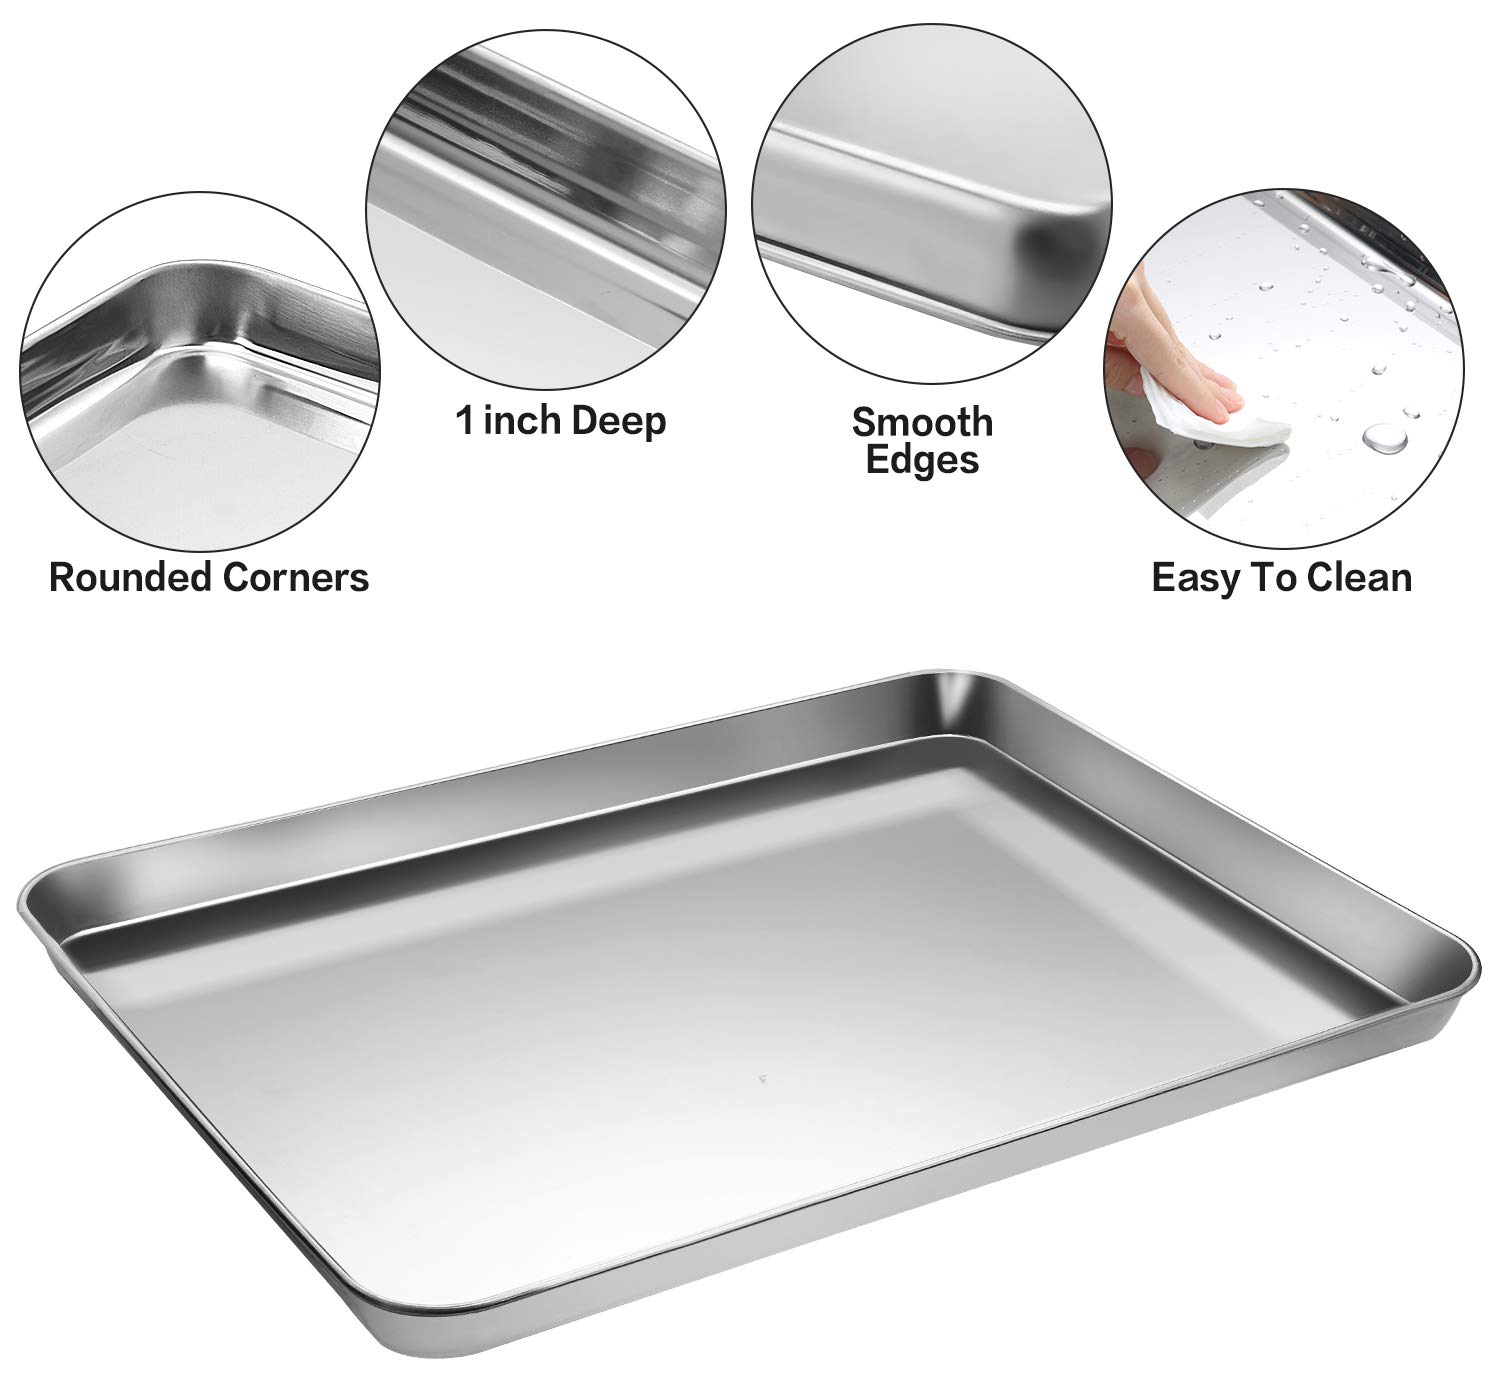 Stainless Steel Baking Sheet Tray Cooling Rack with Silicone Baking Mat Set, Cookie Pan with Cooling Rack, Set of 9 (3 Sheets + 3 Racks + 3 Mats), Non Toxic, Heavy Duty & Easy Clean